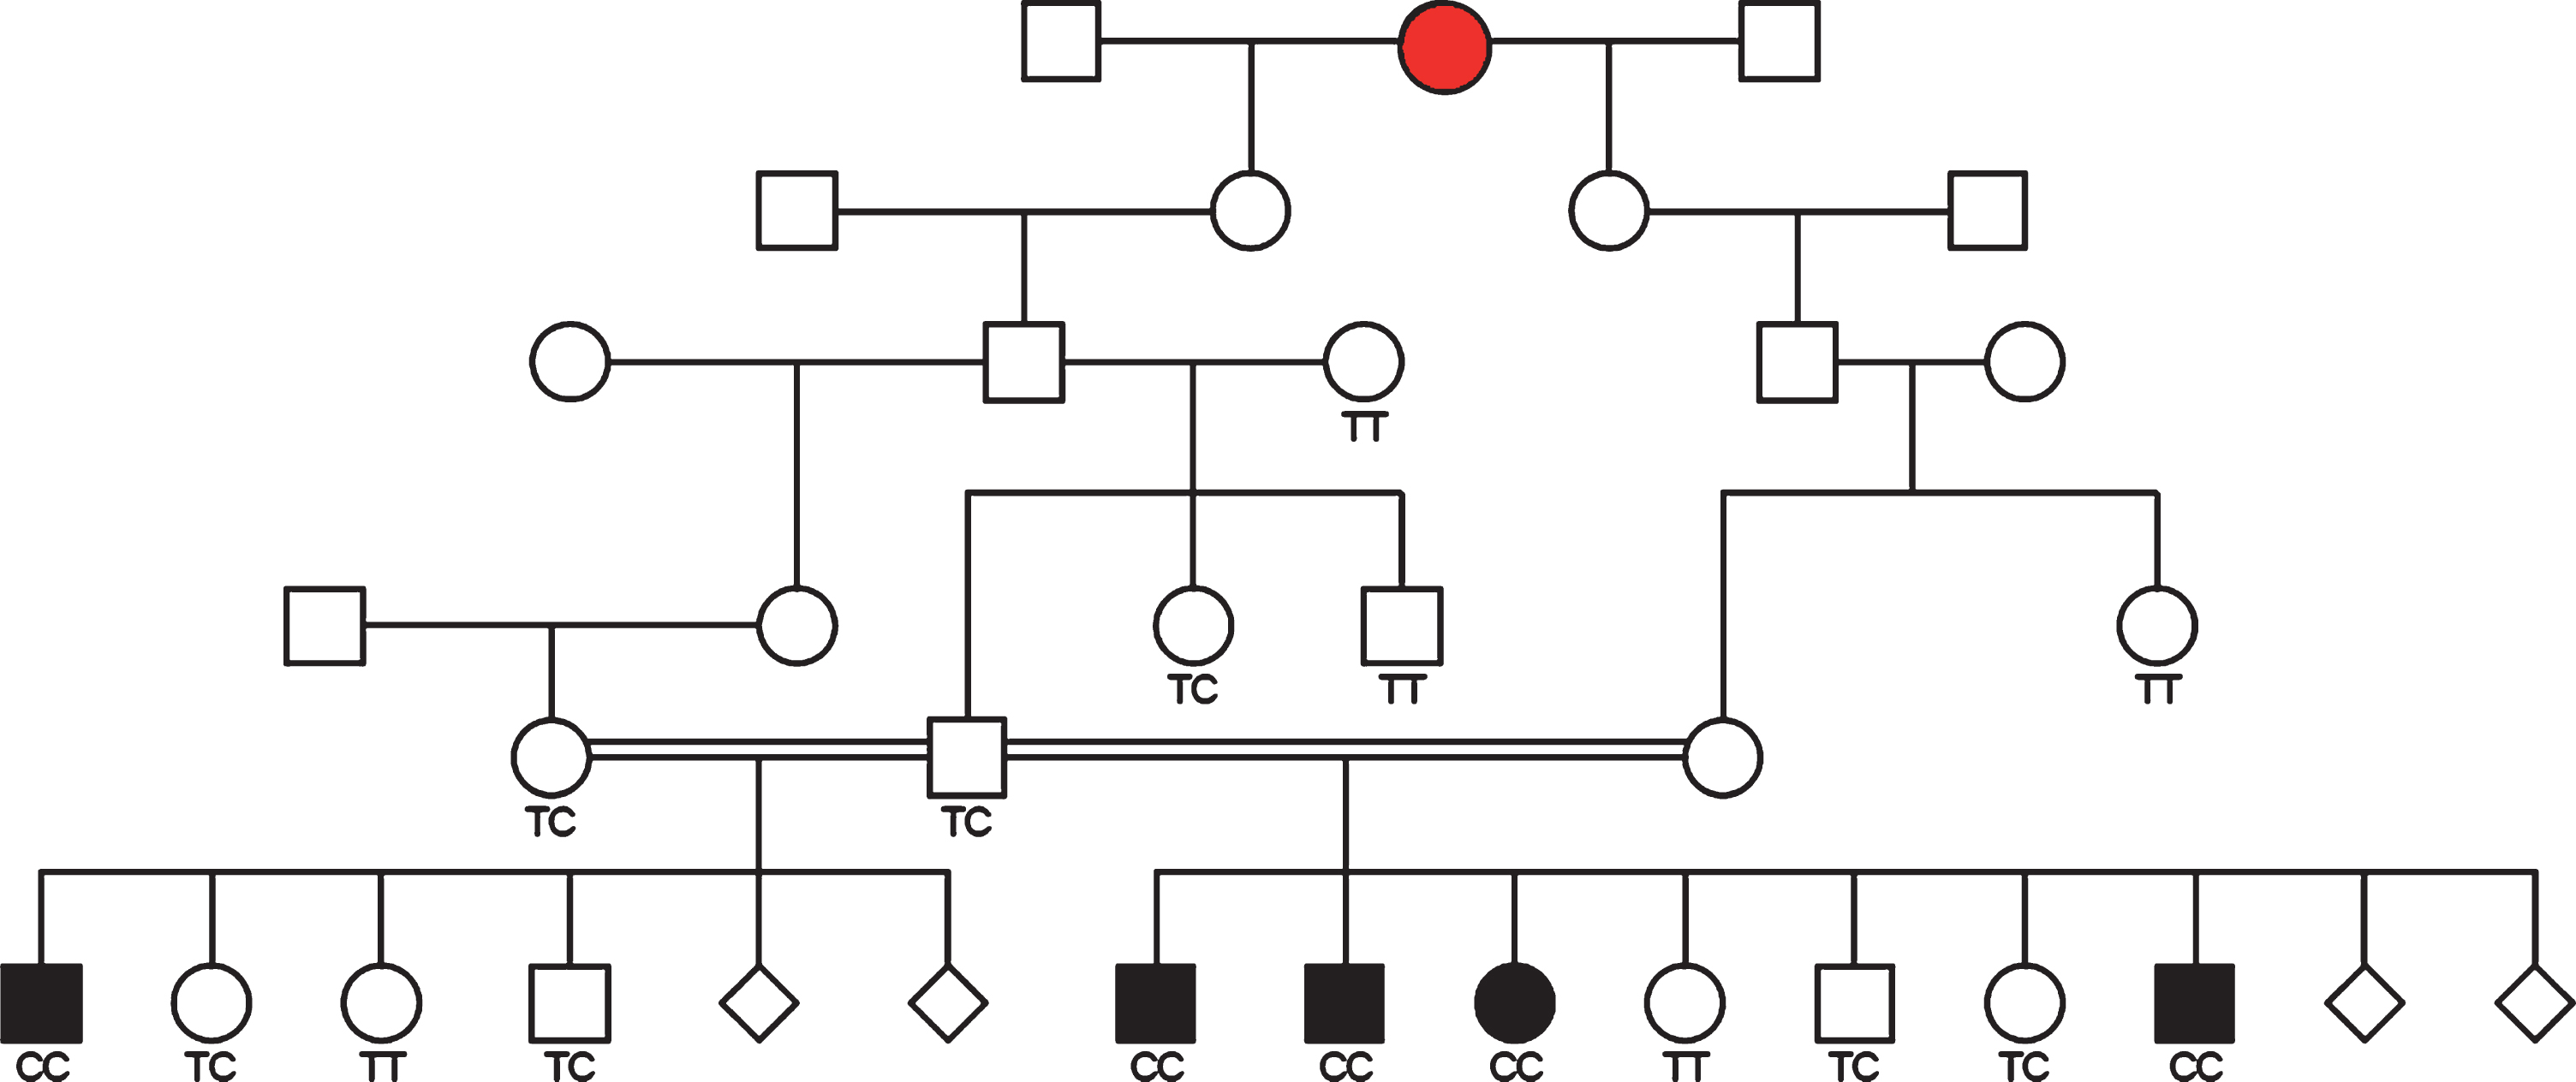 Pedigree depiction of 5 cases from 2 litters resulting from the same sire and two different females. Genotypes for the SLC25A12 mutation identified in this study are provided and a putative female founder is indicated with red shading.